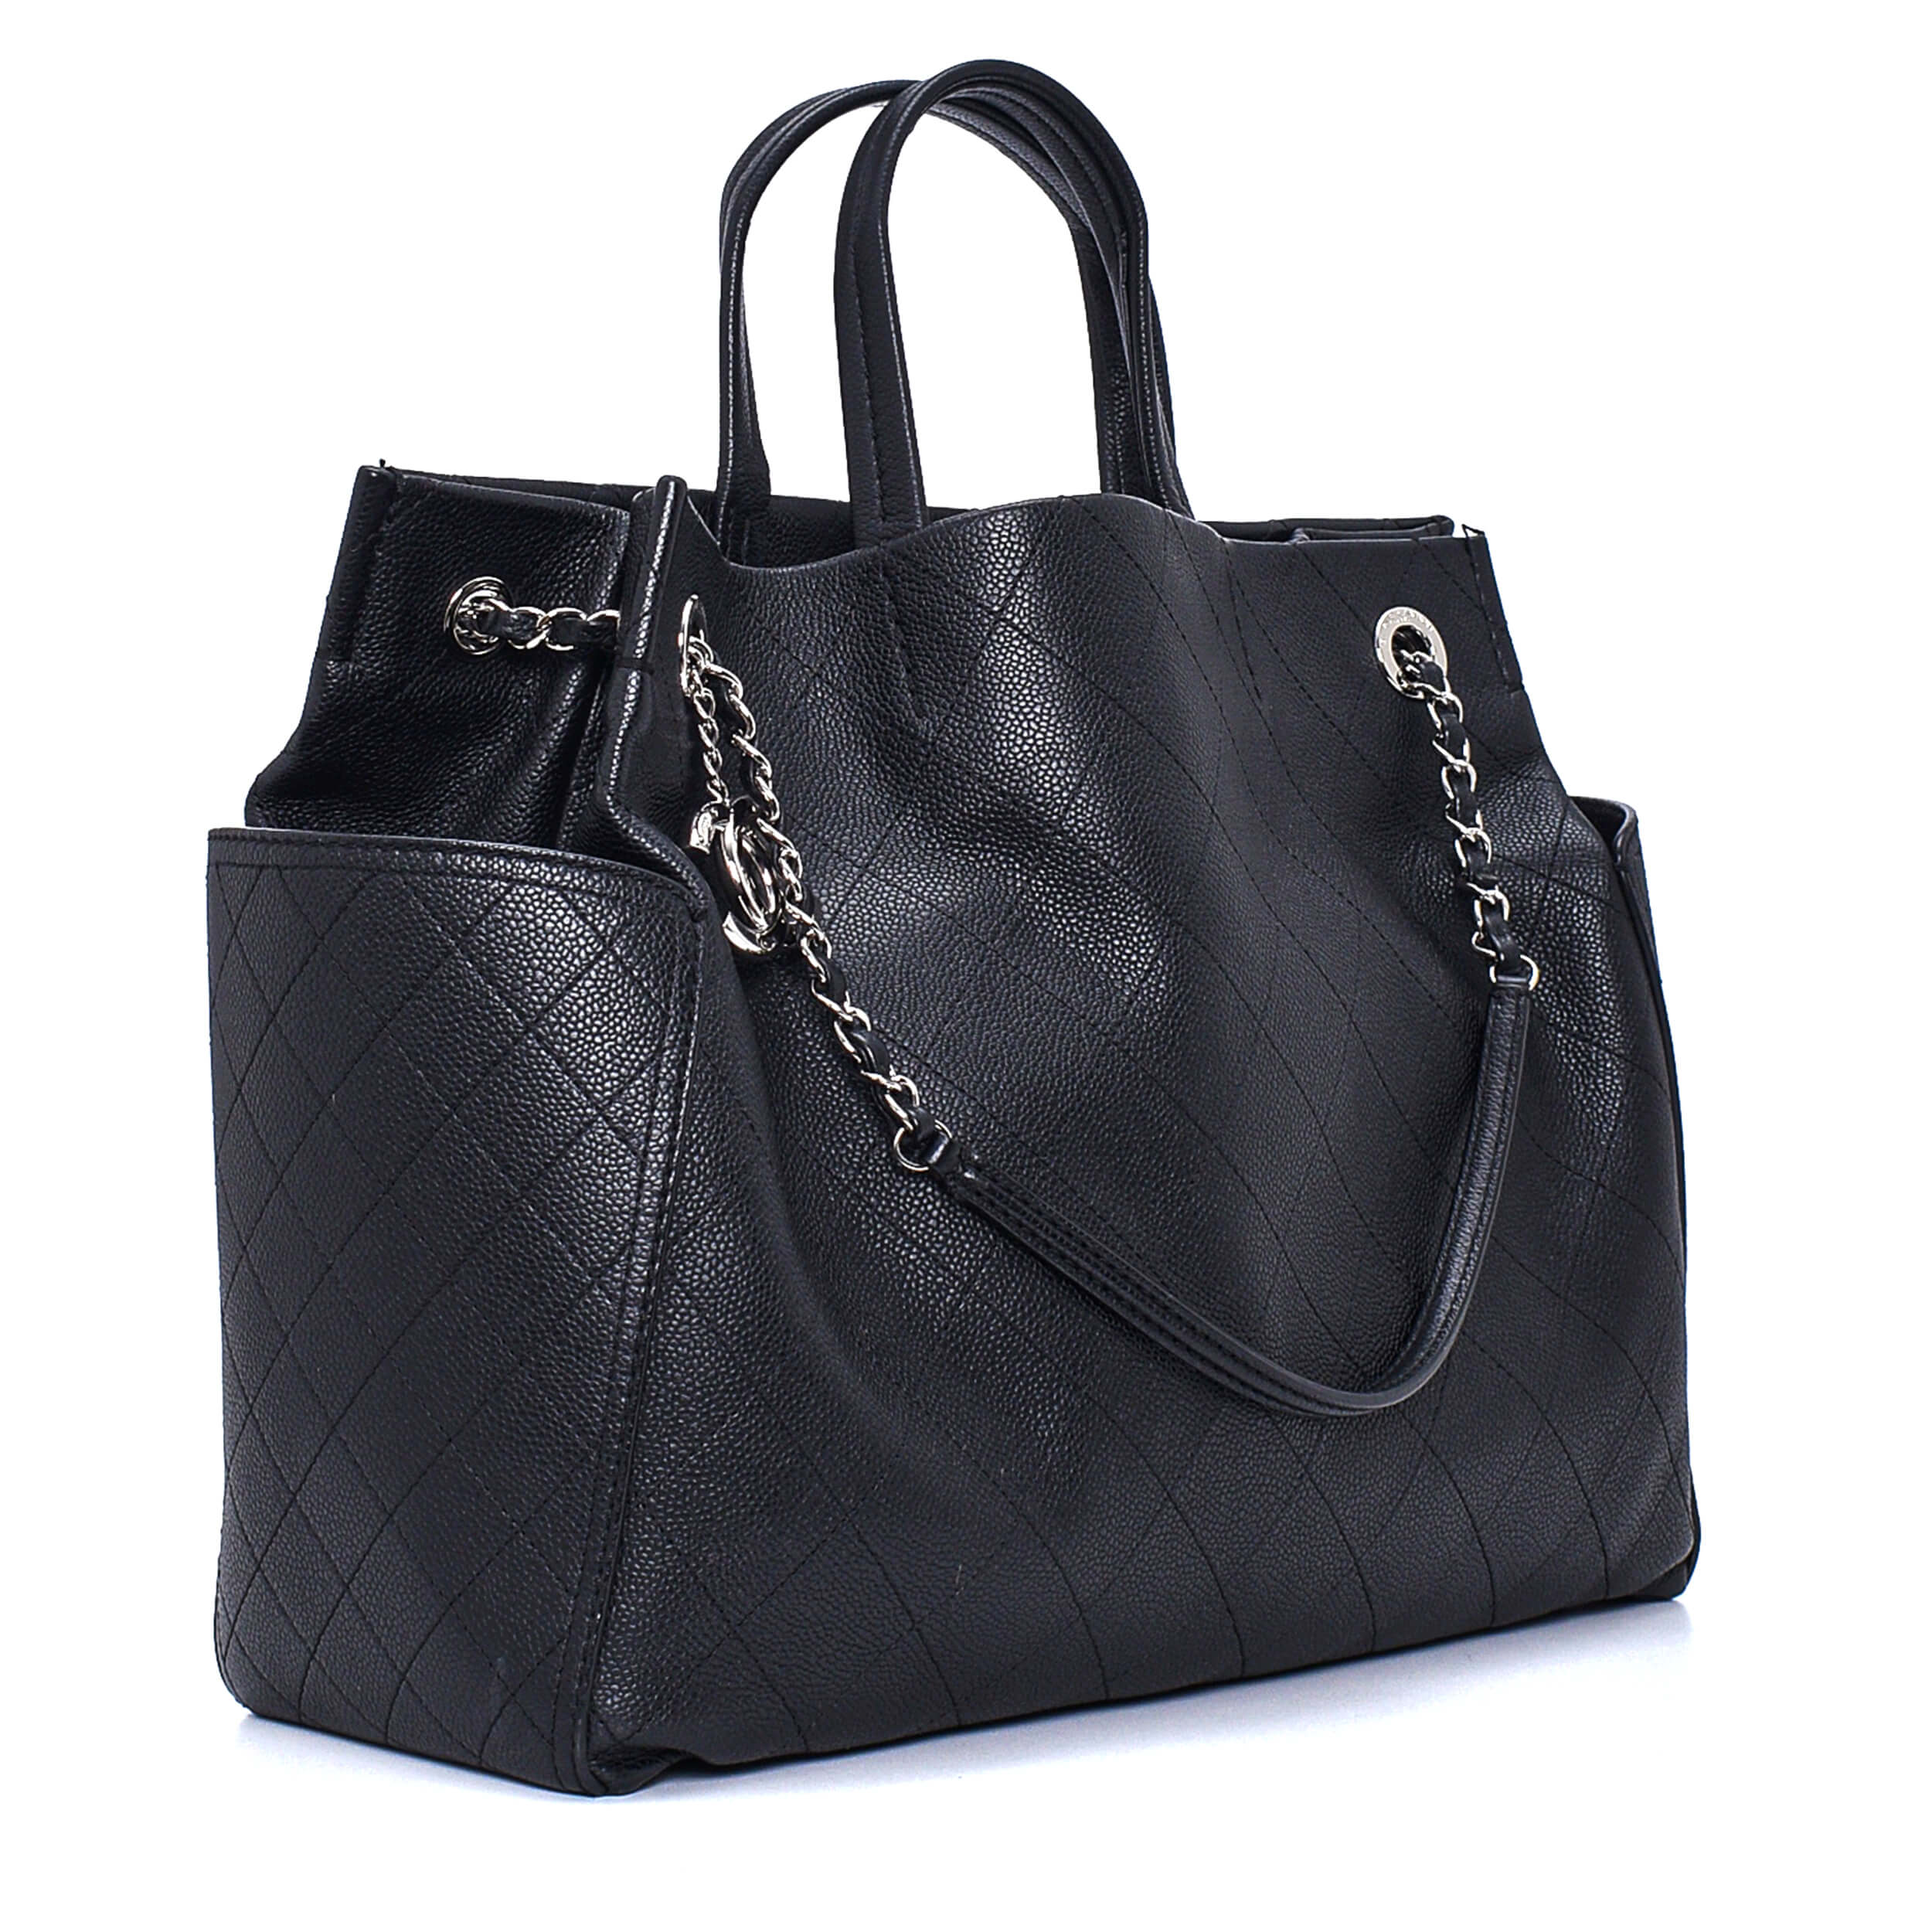 Chanel - Black Quilted CC CHarm Detail Tote Bag 